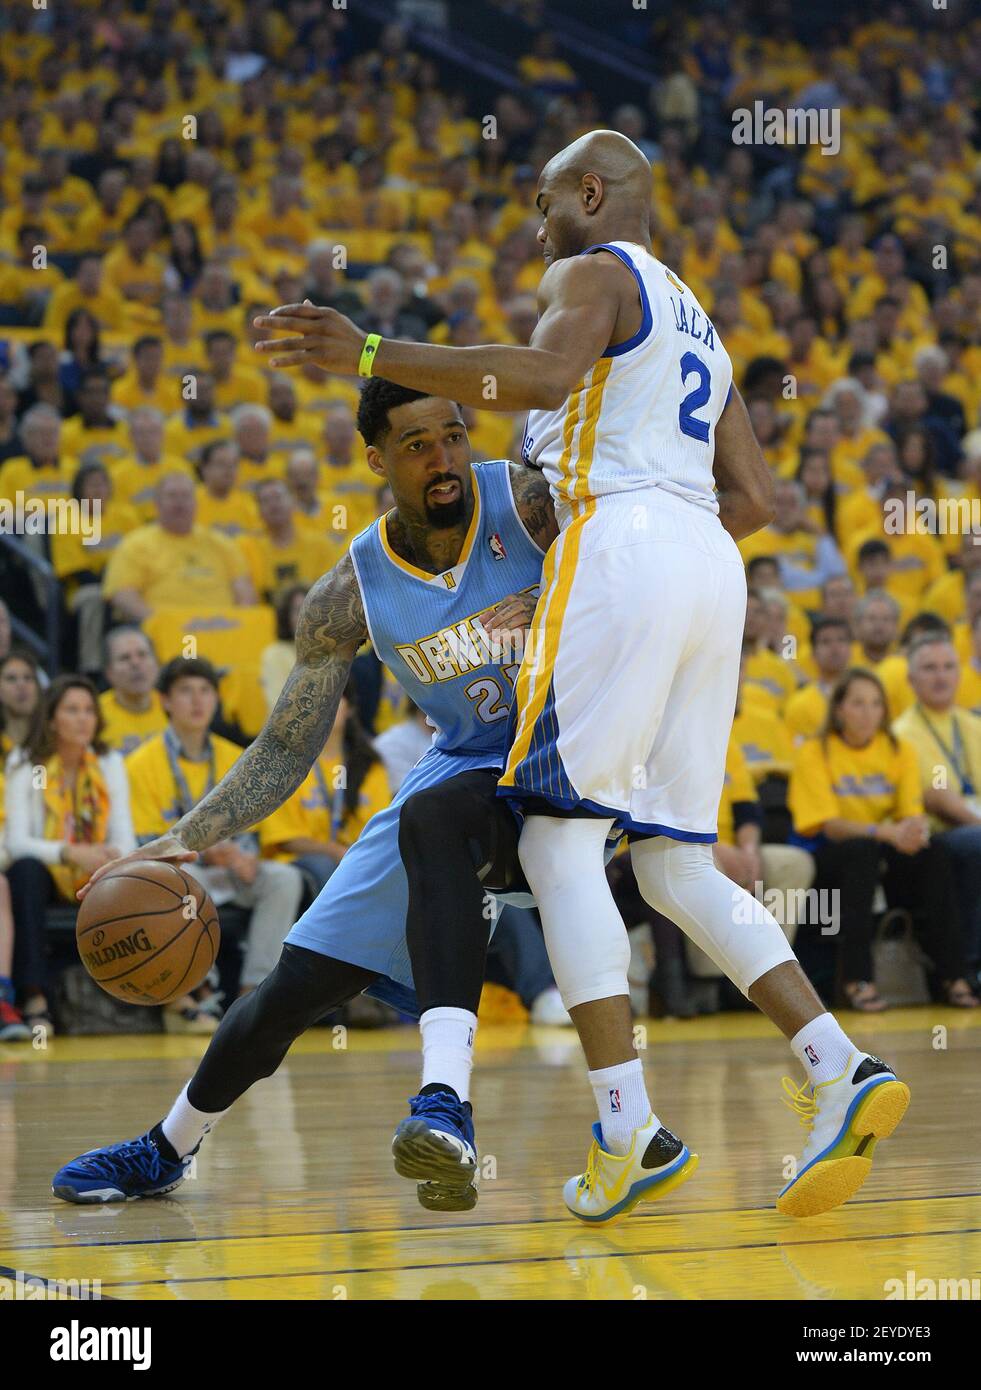 Photos from Golden State Warriors vs. Denver Nuggets at Oracle